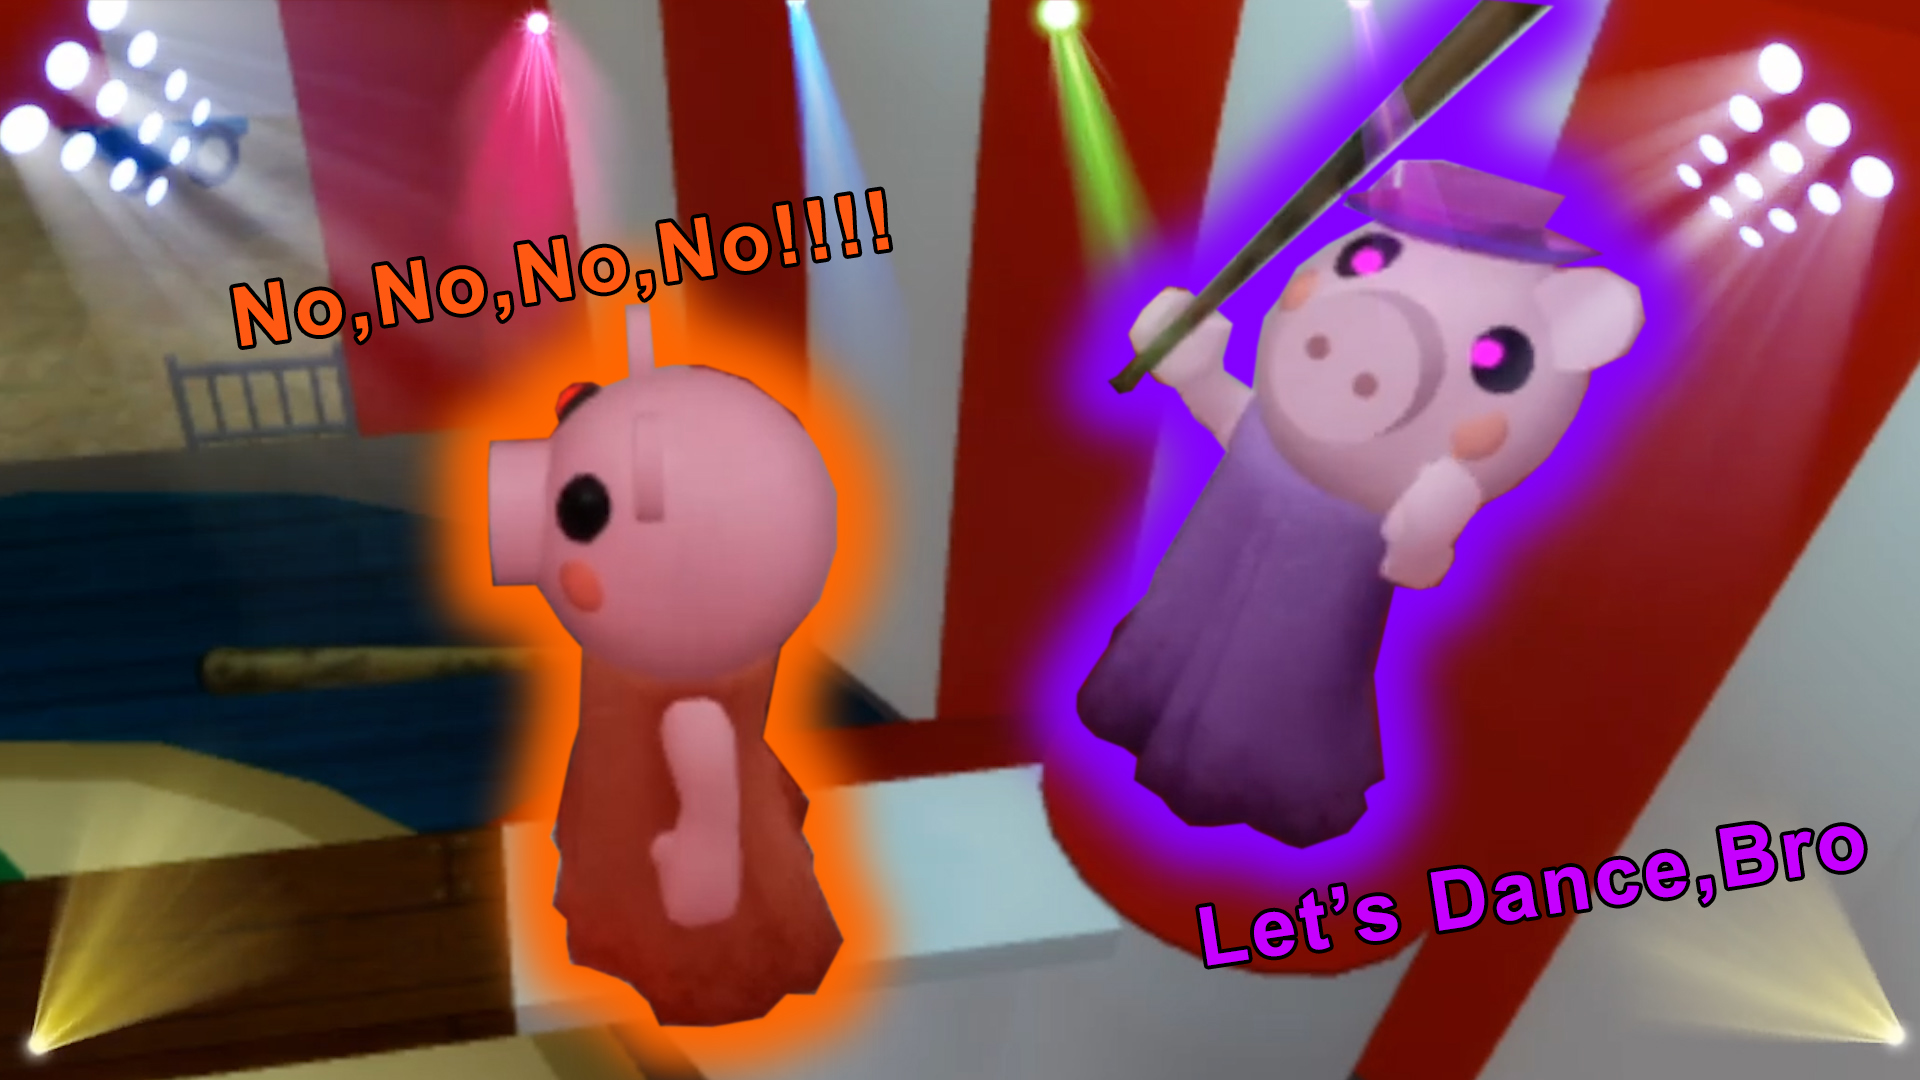 More videos for you#fyp#roblox#piggy#meme#animation